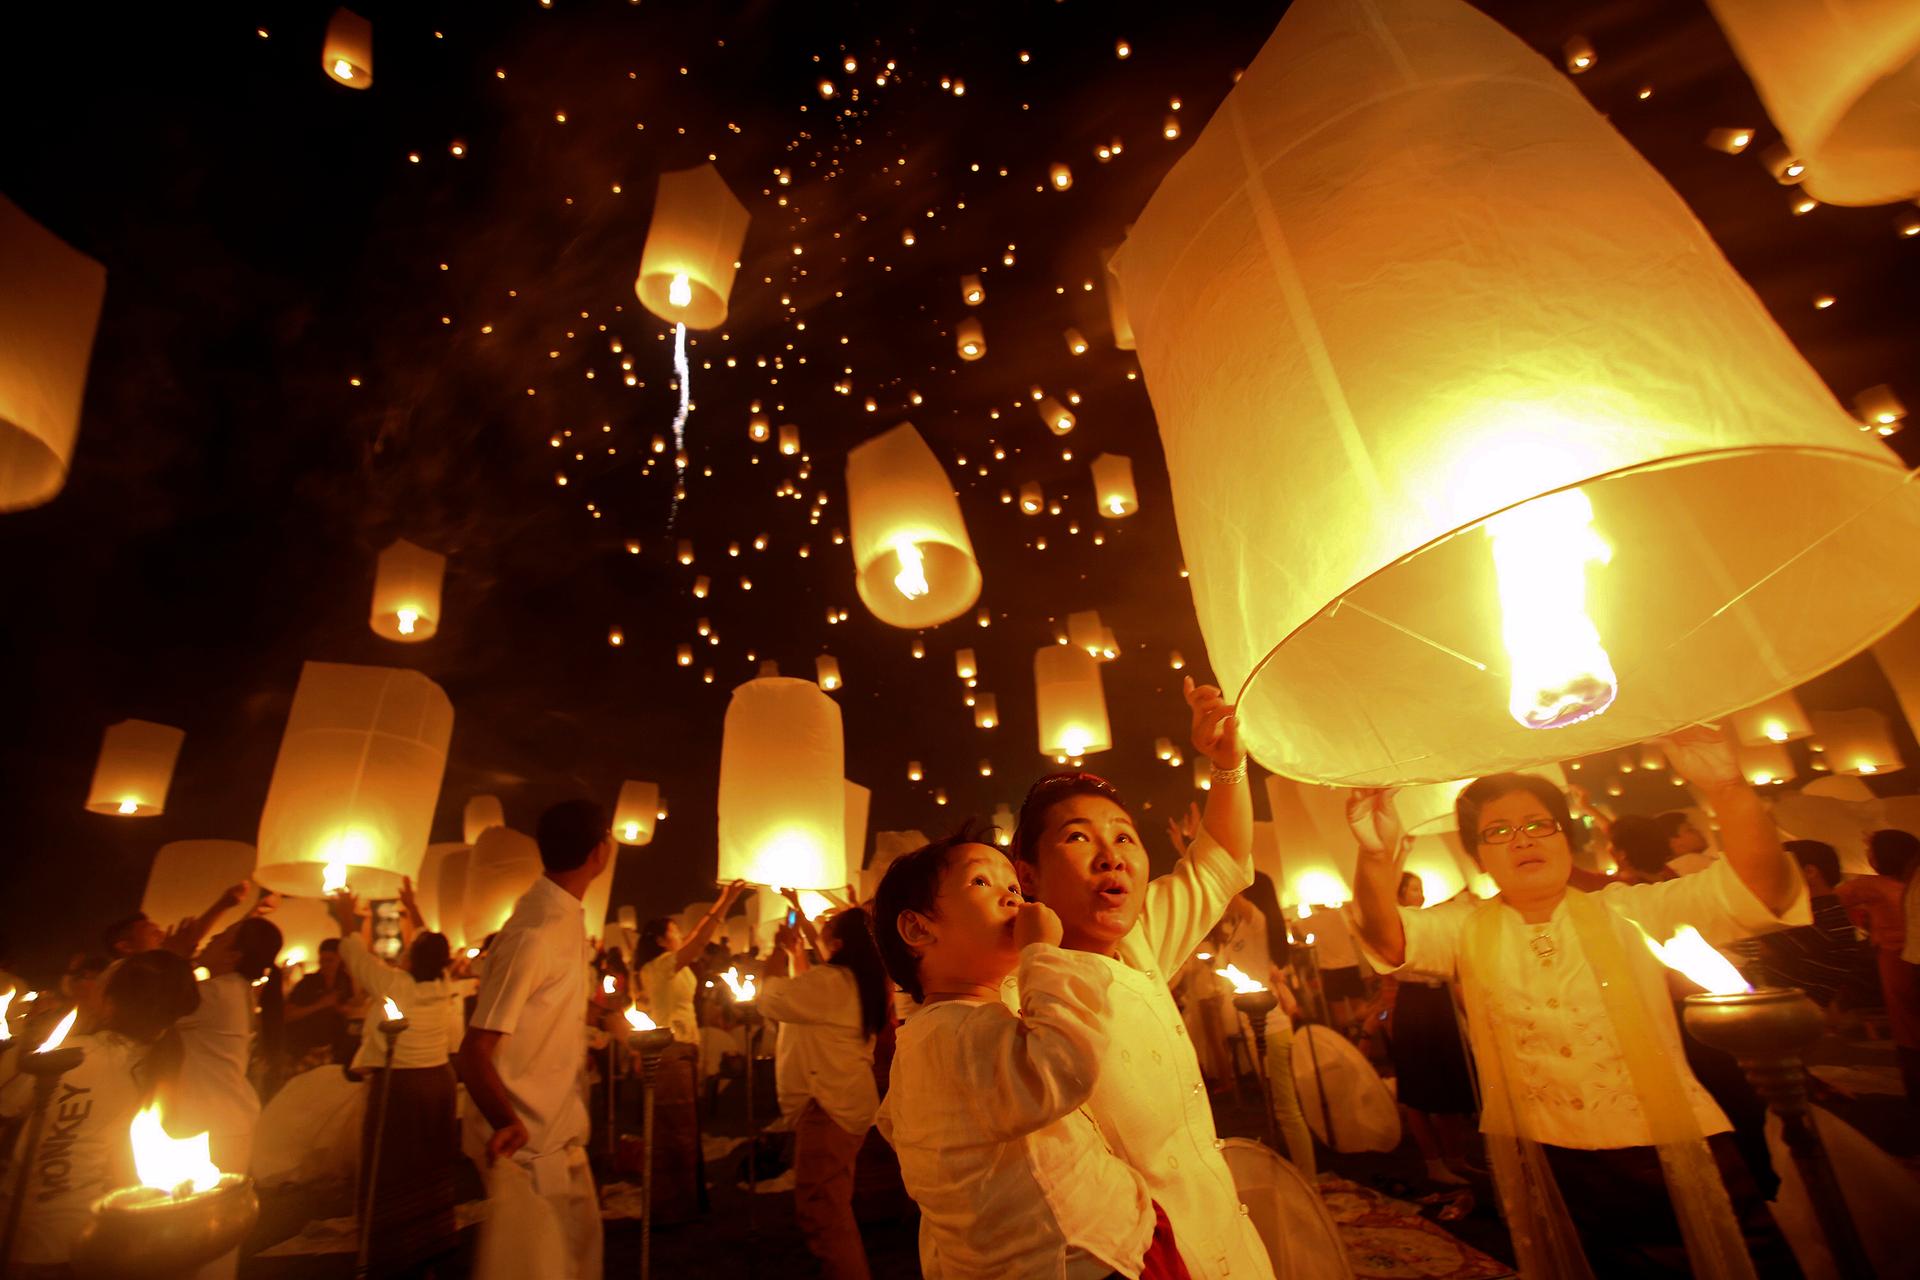 Khom loy lanterns launched into the sky